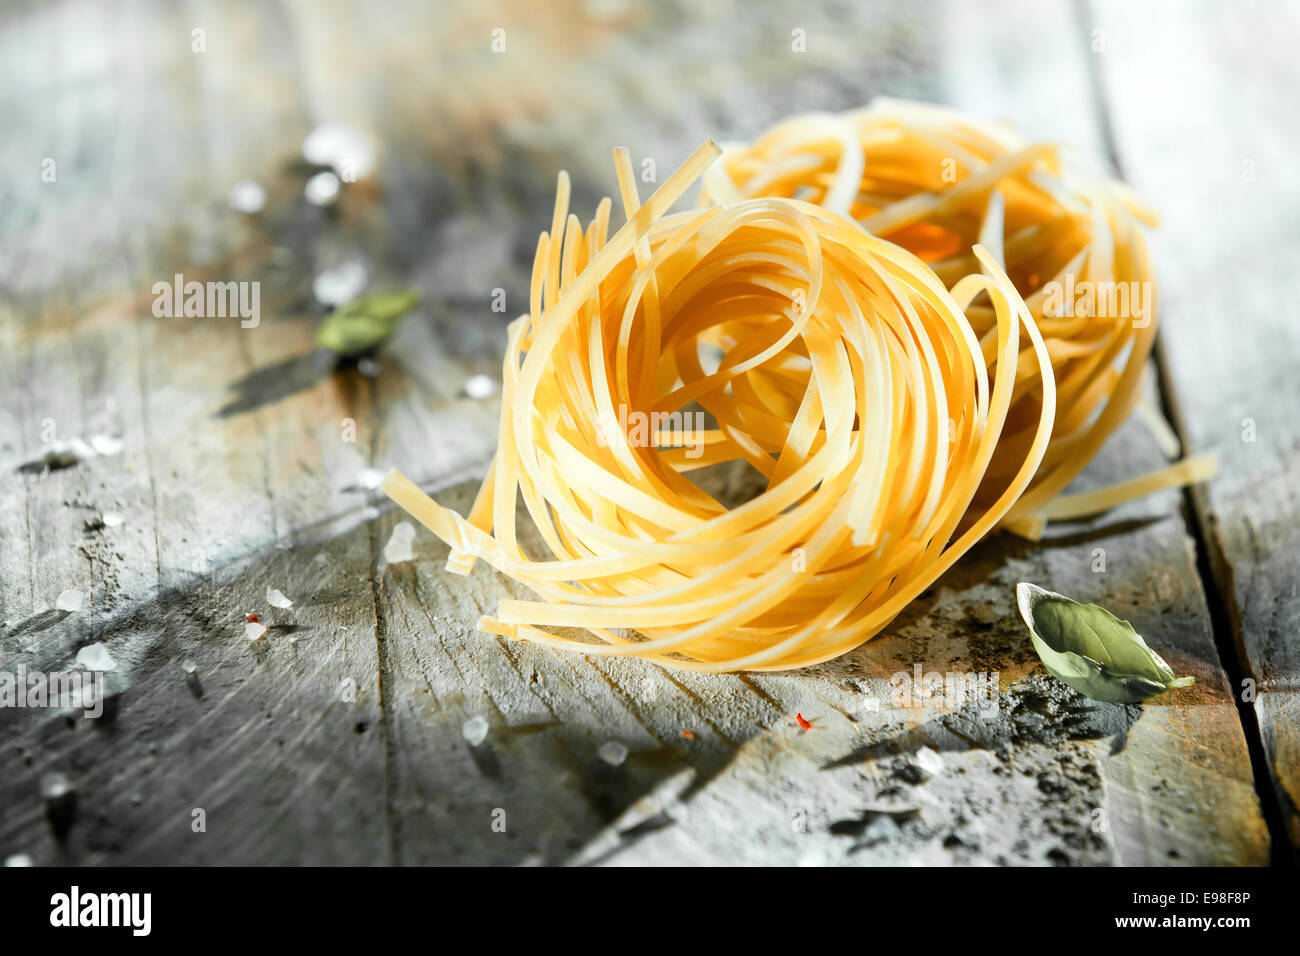 Dried Italian linguine or tagliatelli pasta in coils lying on a rustic grungy grey wooden background with copyspace Stock Photo